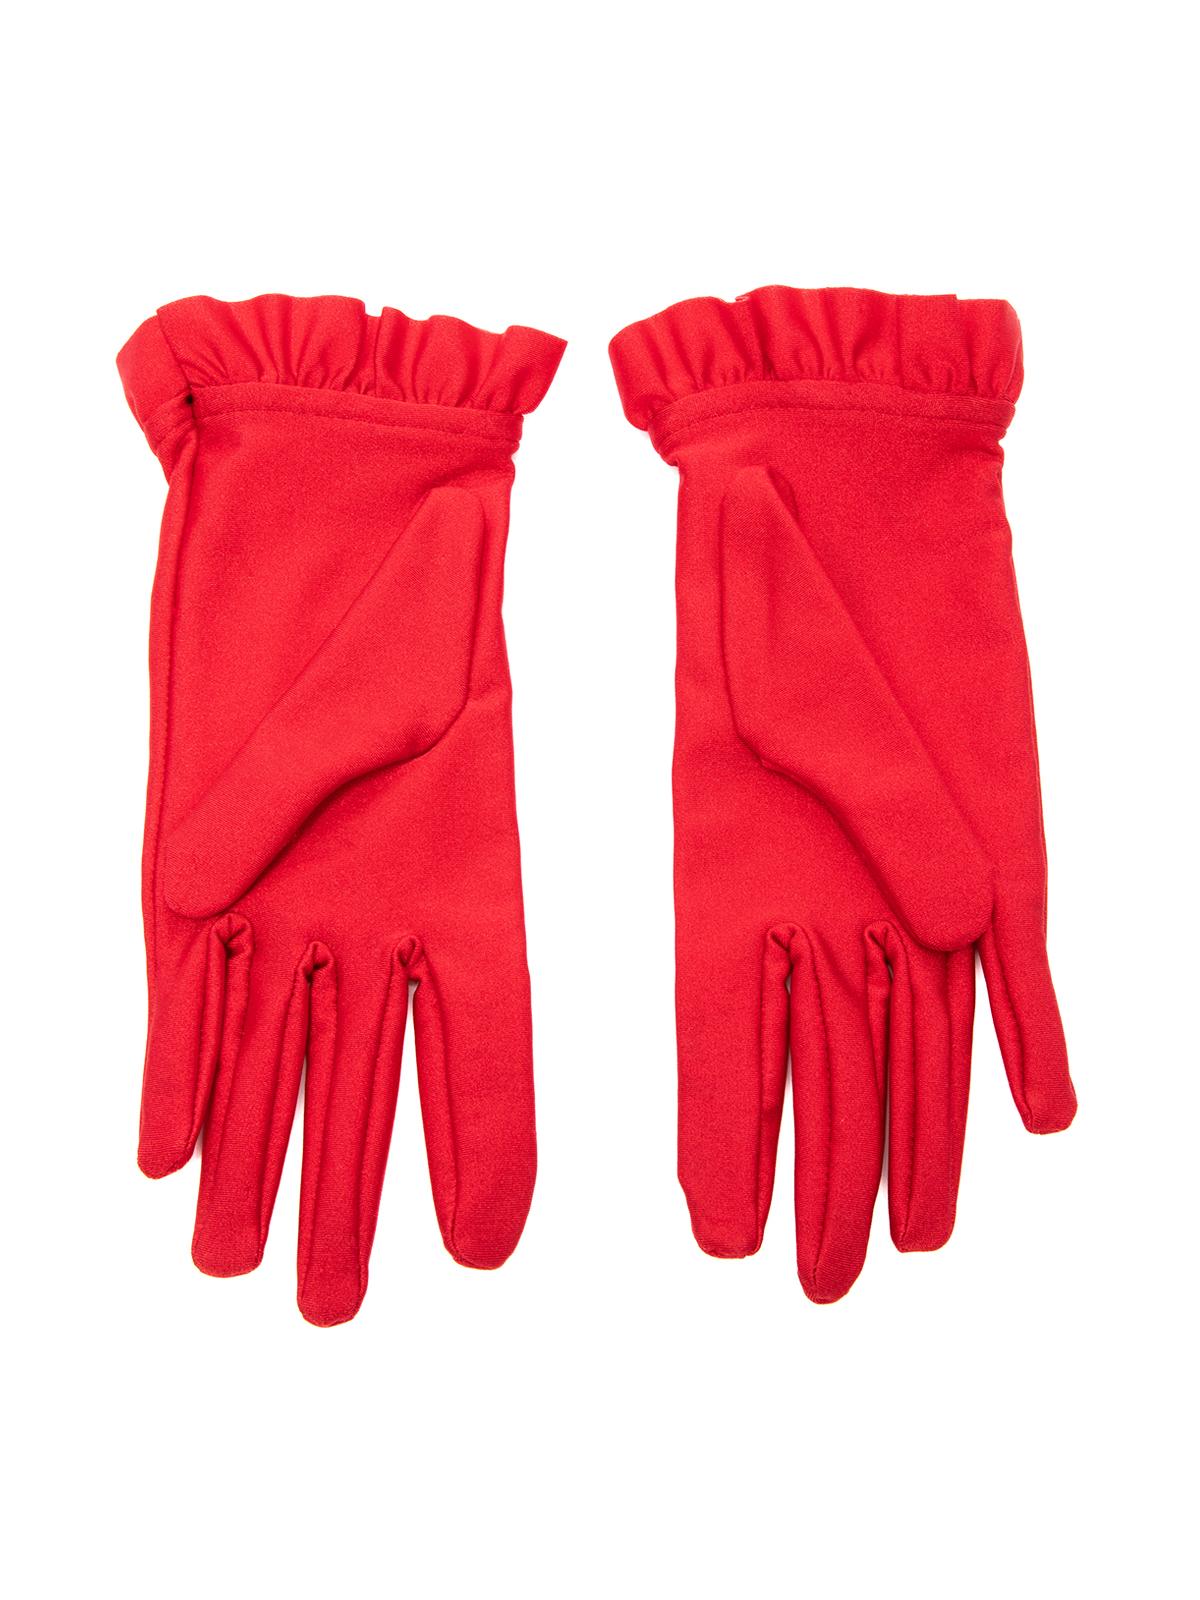 CONDITION is Very good. Minimal wear to gloves is evident. Slightly visible stain on thumb of this used Balenciaga designer resale item. Details Red Nylon Ruffled edges on gloves Wrist gloves Made in Italy Composition EXTERIOR:Nylon INTERIOR:Nylon